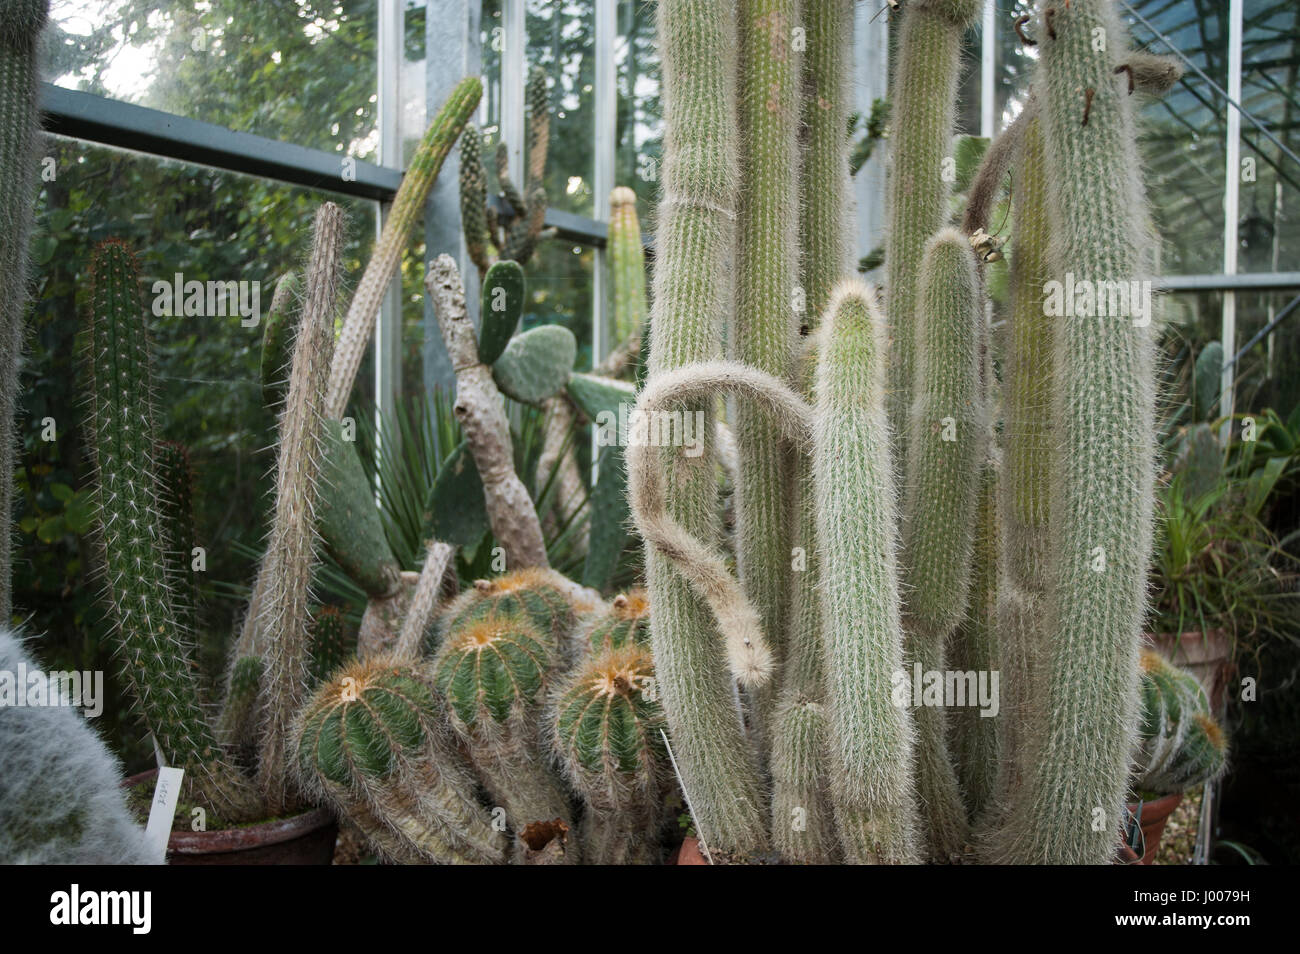 Collection of cactus plants growing in a greenhouse Stock Photo